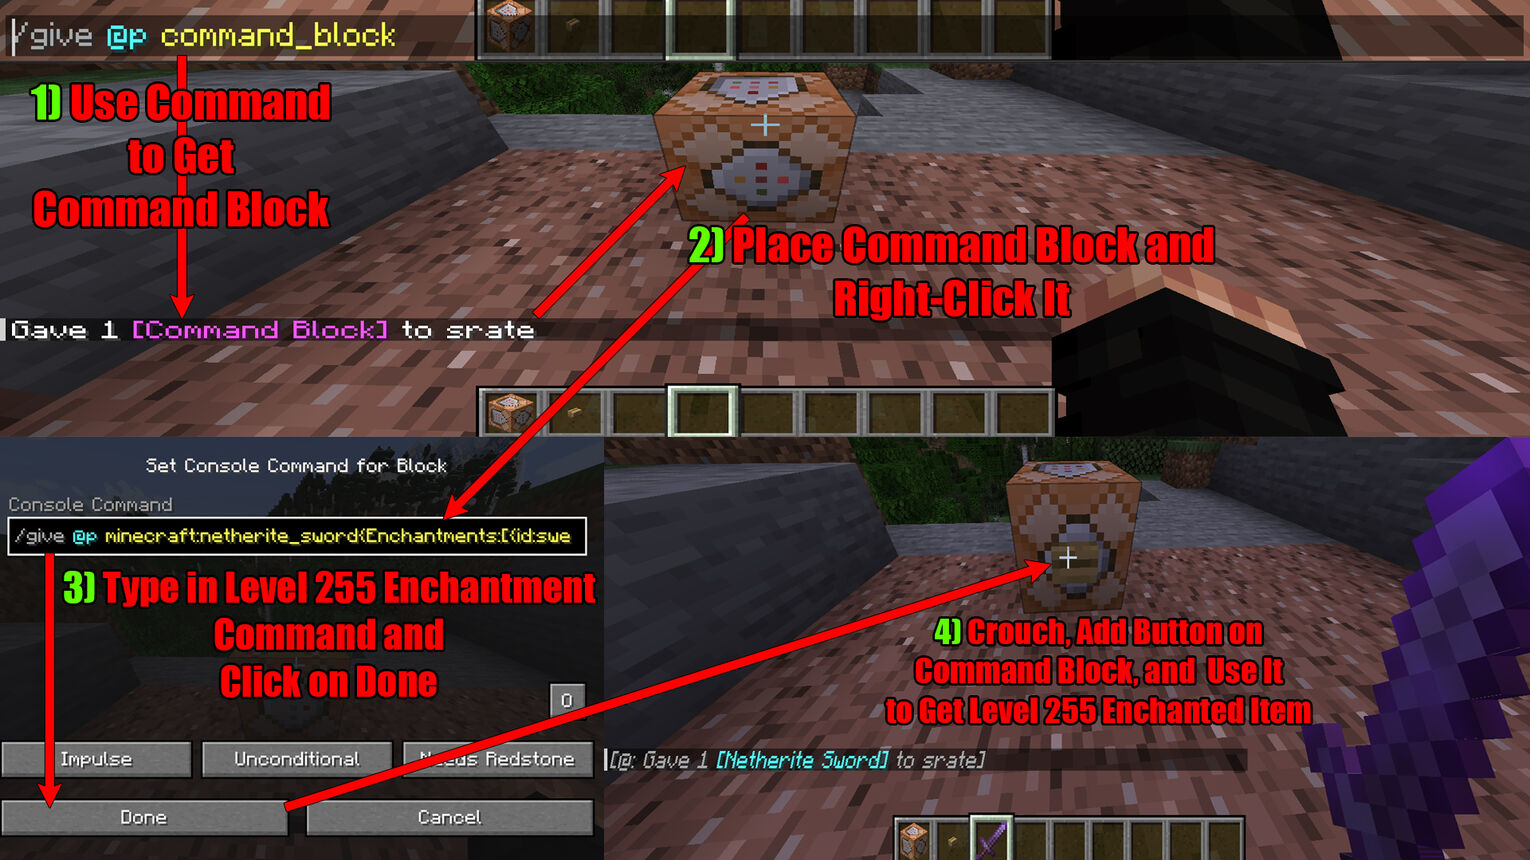 Minecraft How to Get Level 255 Enchantments Using Command Block